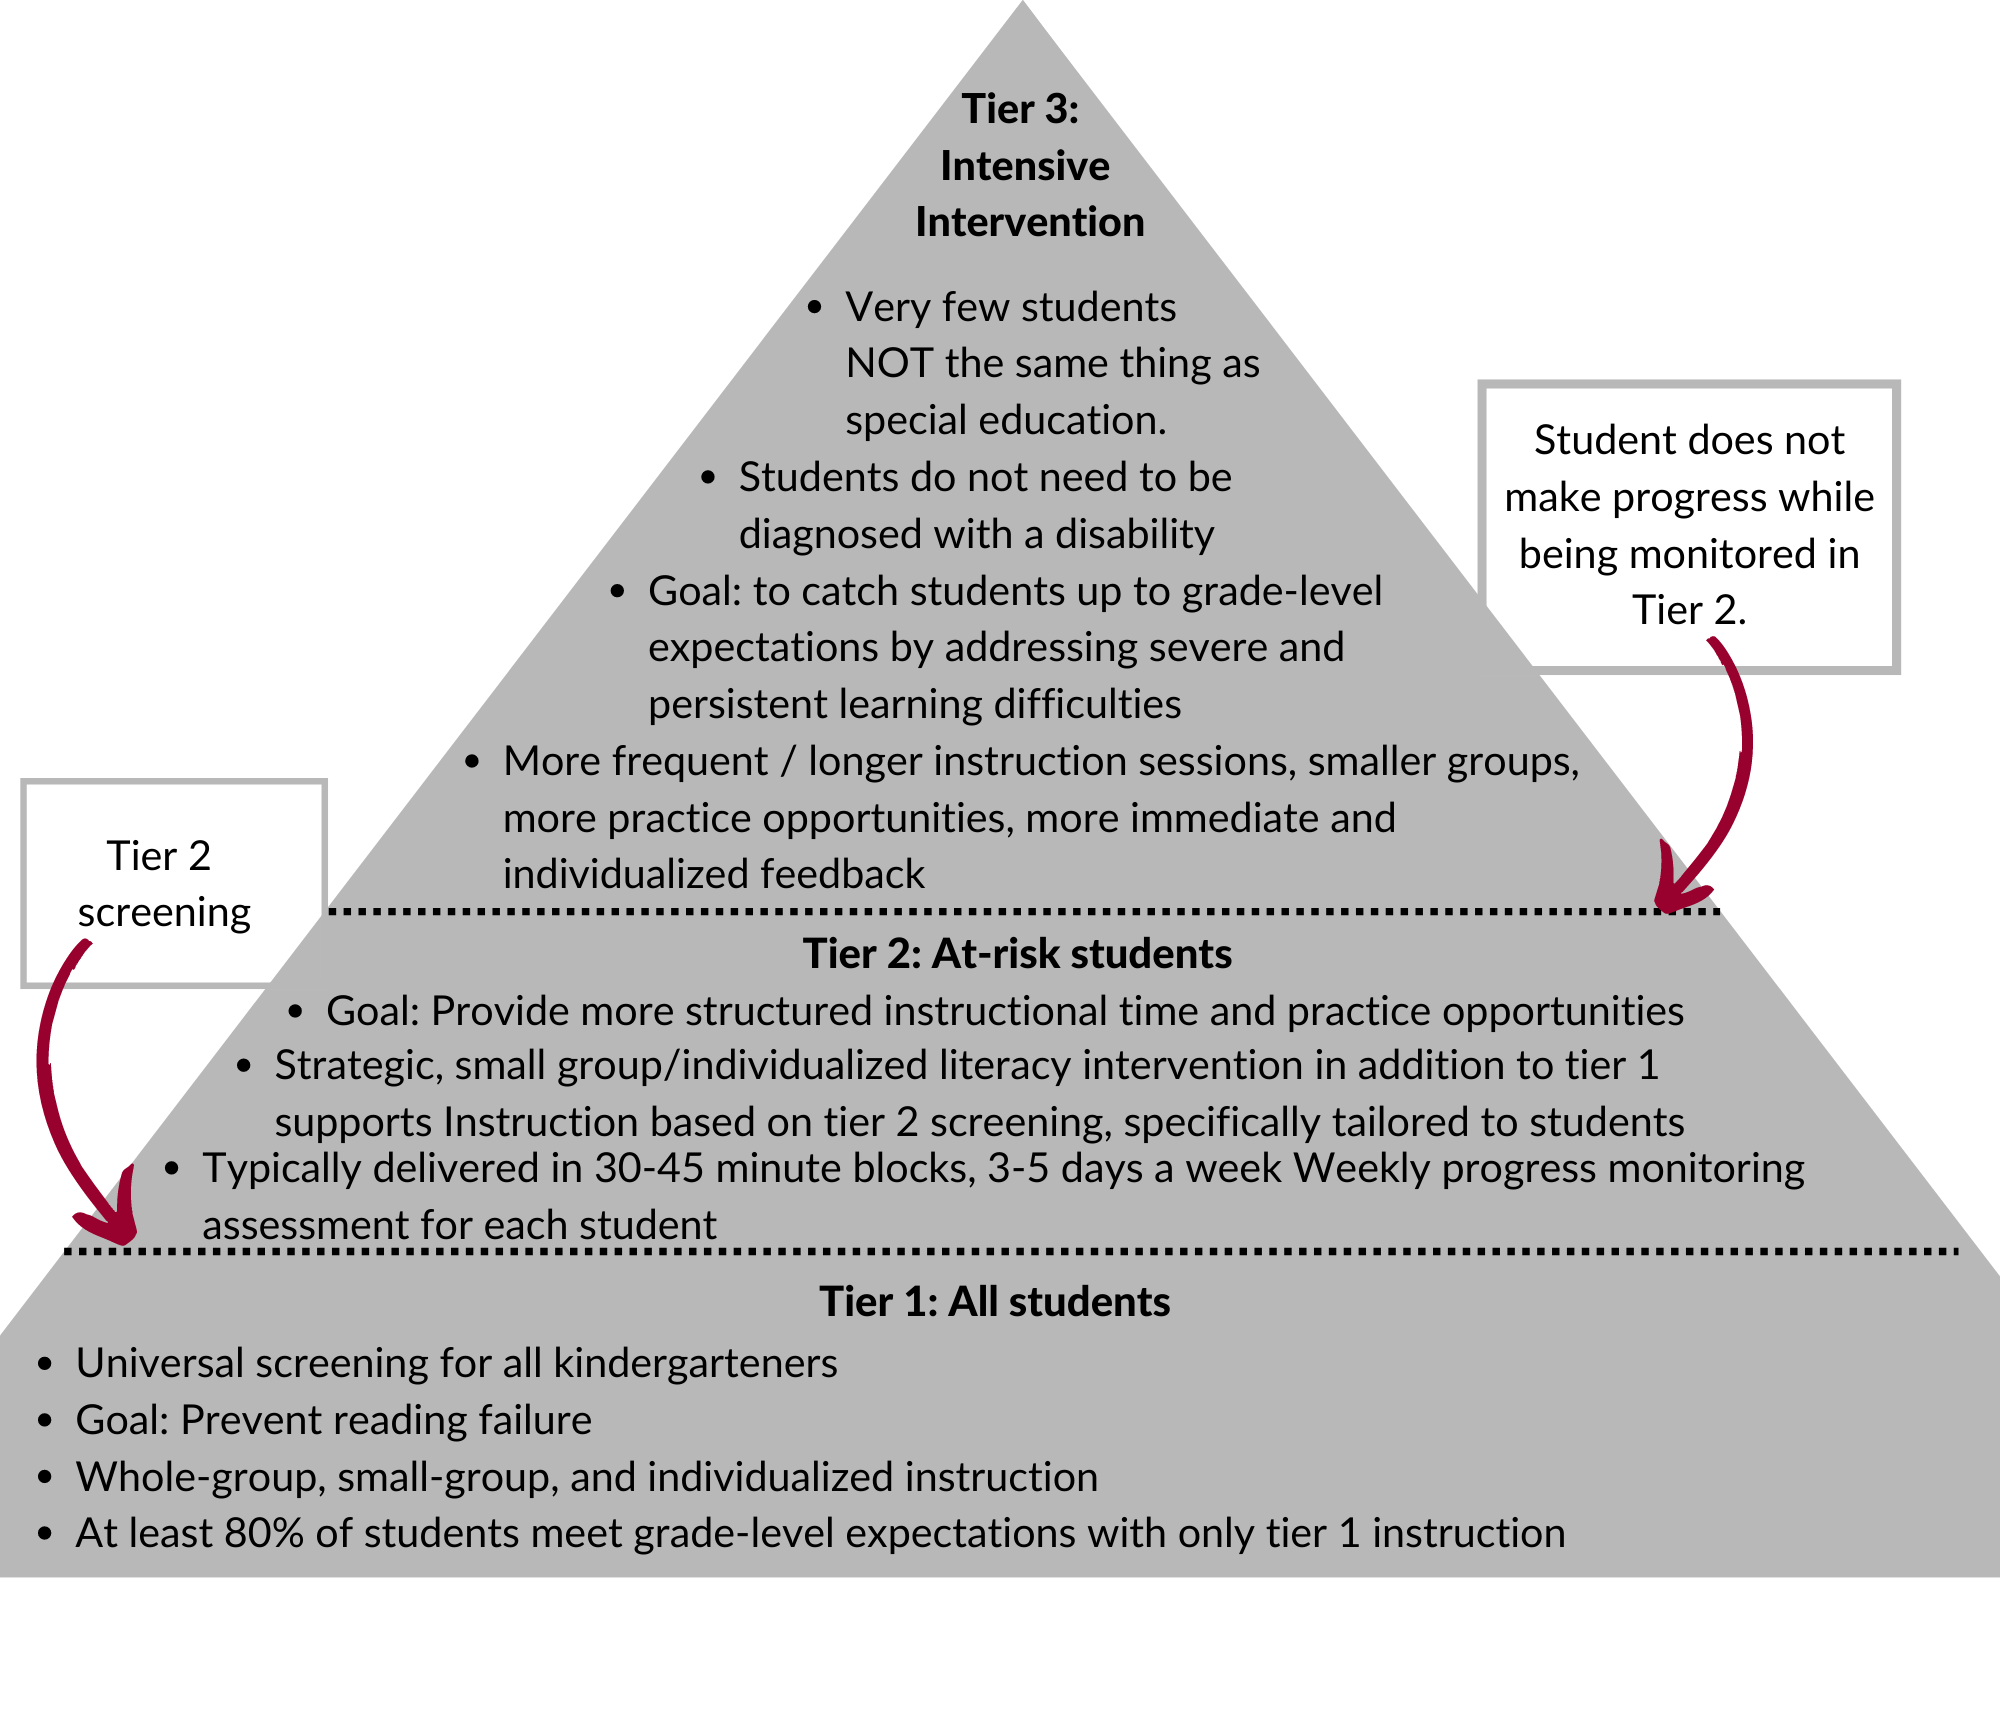 Pyramid-shaped flowchart describing Ohio's dyslexia tier system, with Tier 3 shown at the top; details available in the Ohio Dyslexia Guidebook